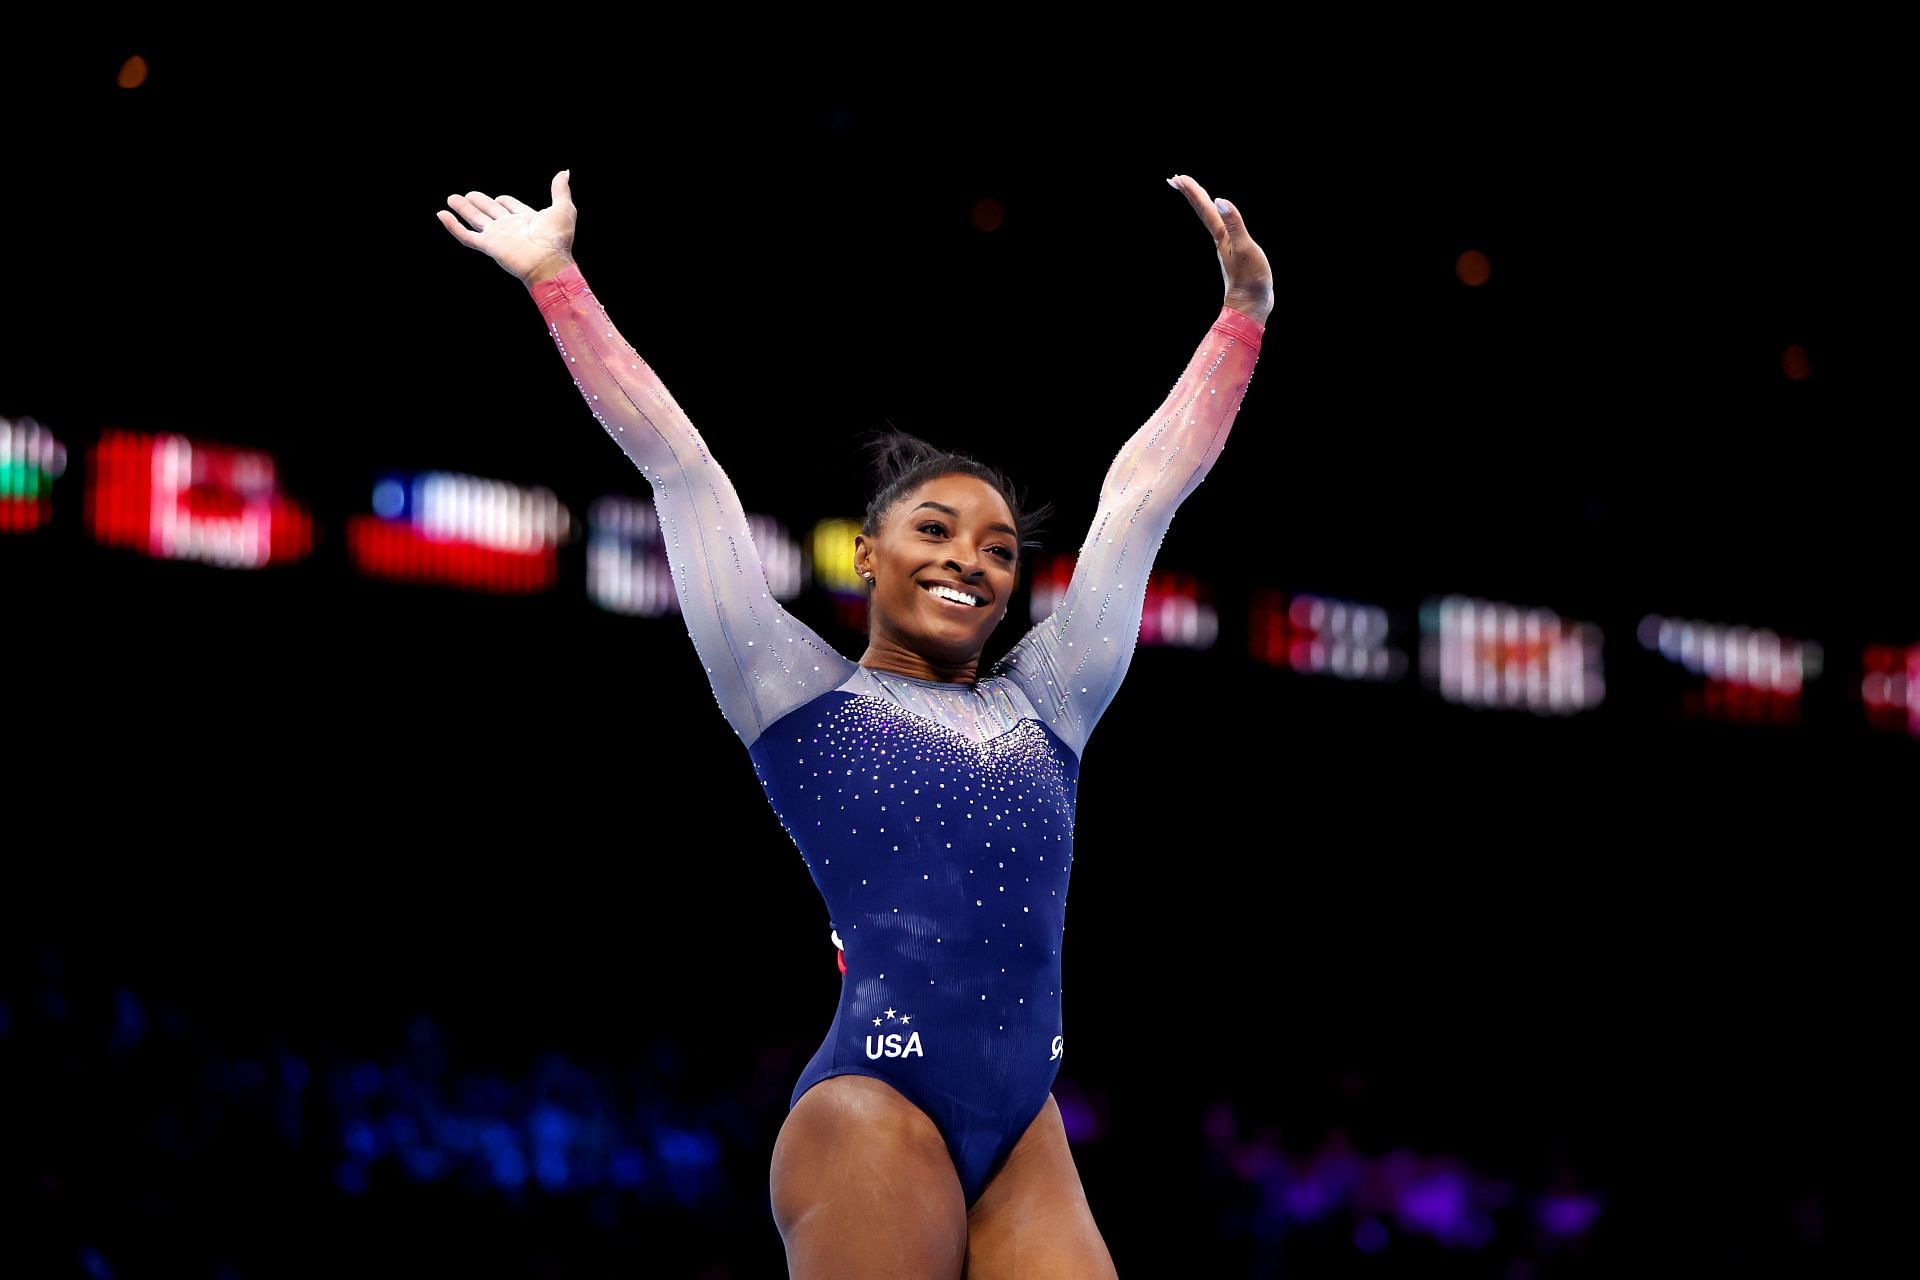 Simone Biles celebrates after her routine on Floor Exercise during the Women&#039;s Team Final at the 2023 World Artistic Gymnastics Championships in Antwerp, Belgium